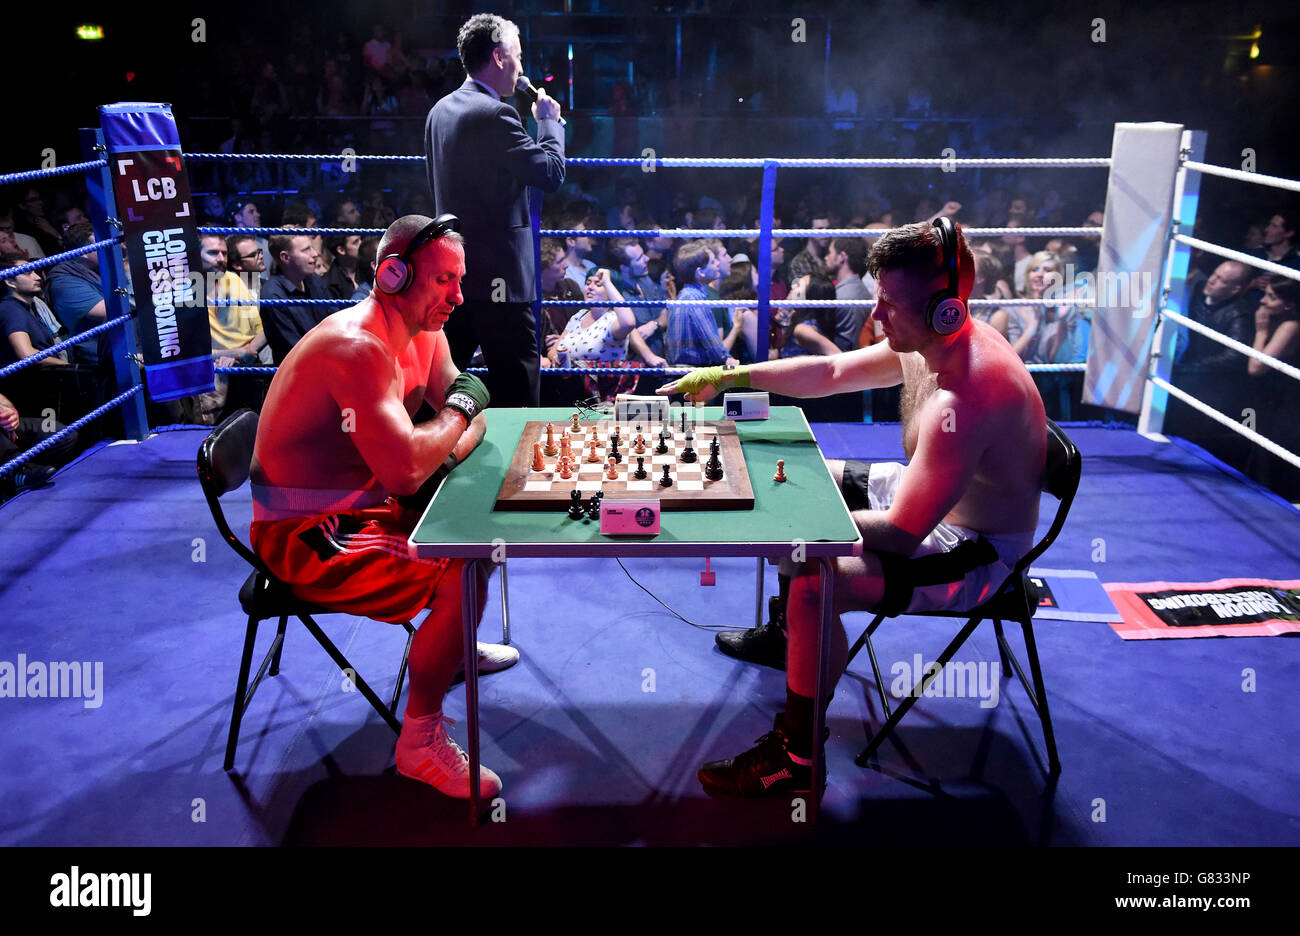 8+ Thousand Chess Boxing Royalty-Free Images, Stock Photos